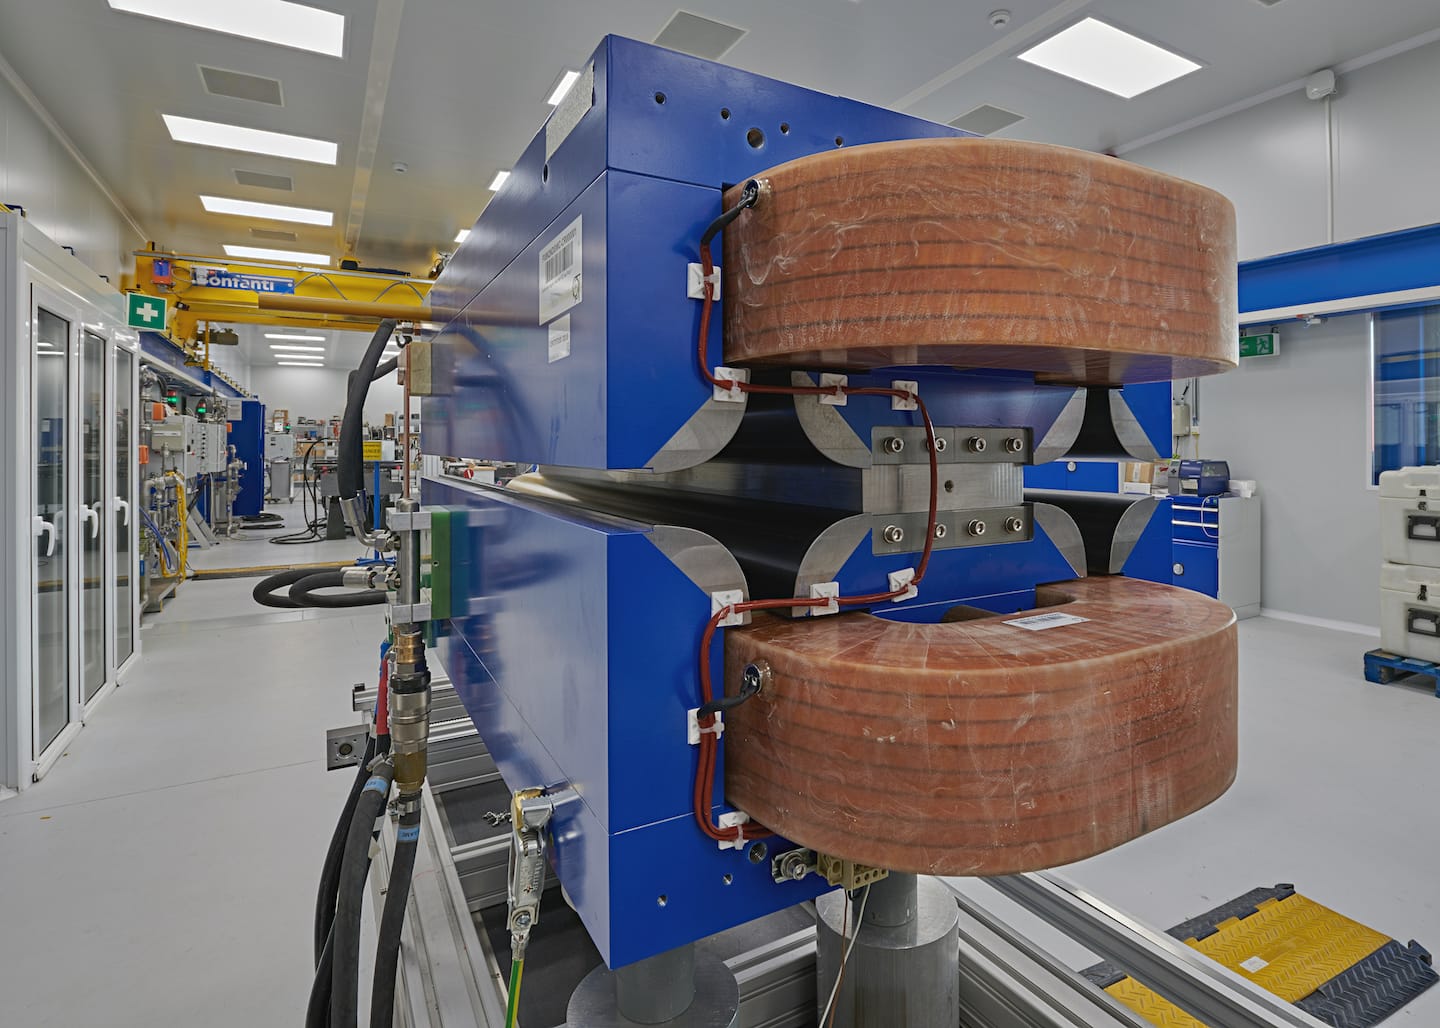 A quadrupole magnet for the FCC-ee collider, tested earlier this summer in CERN’s new magnet test facility (Image: Stephan Russenschuck/CERN)